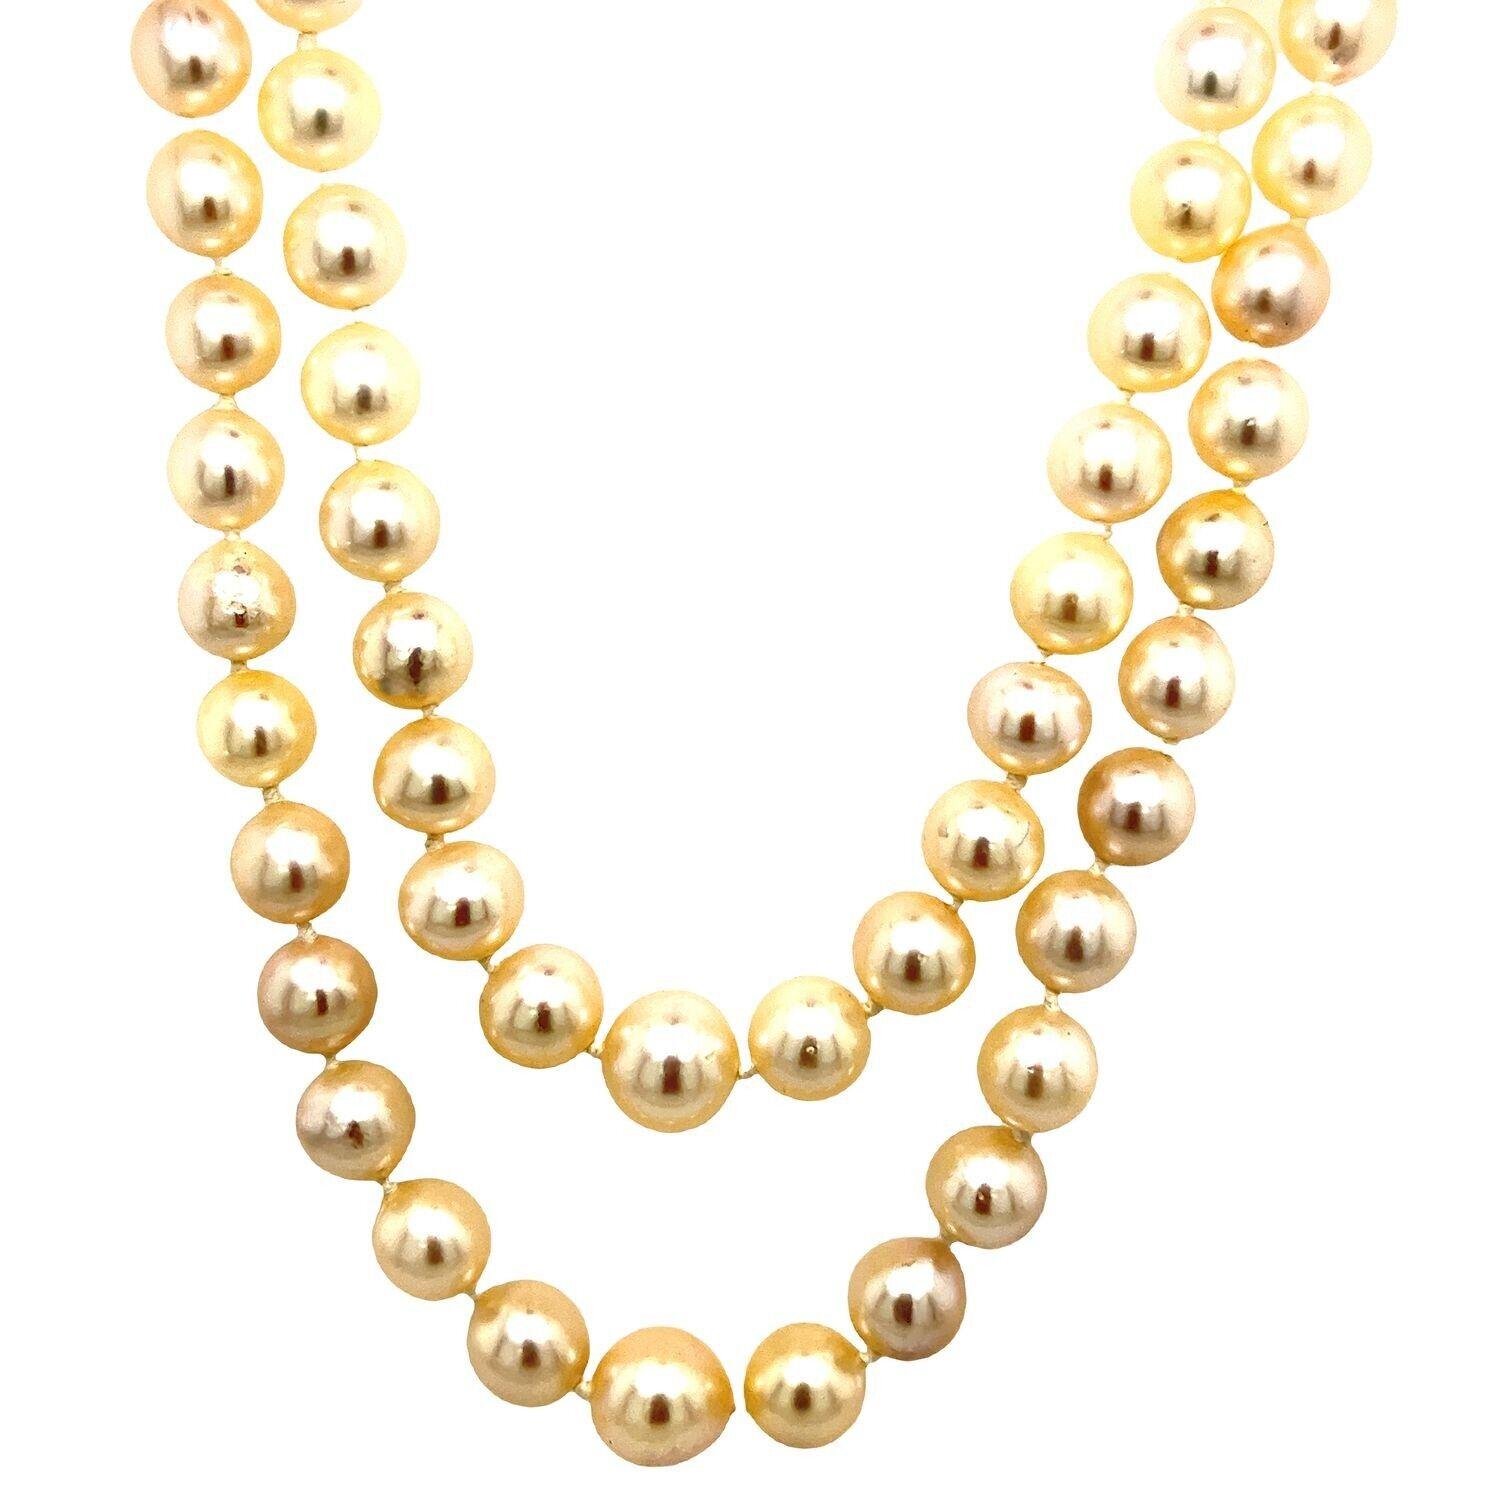 This vintage 2-row 6.8mm cultured pearl necklace is set with a 925 Silver clasp with white spinel gemstones. The total length is 18